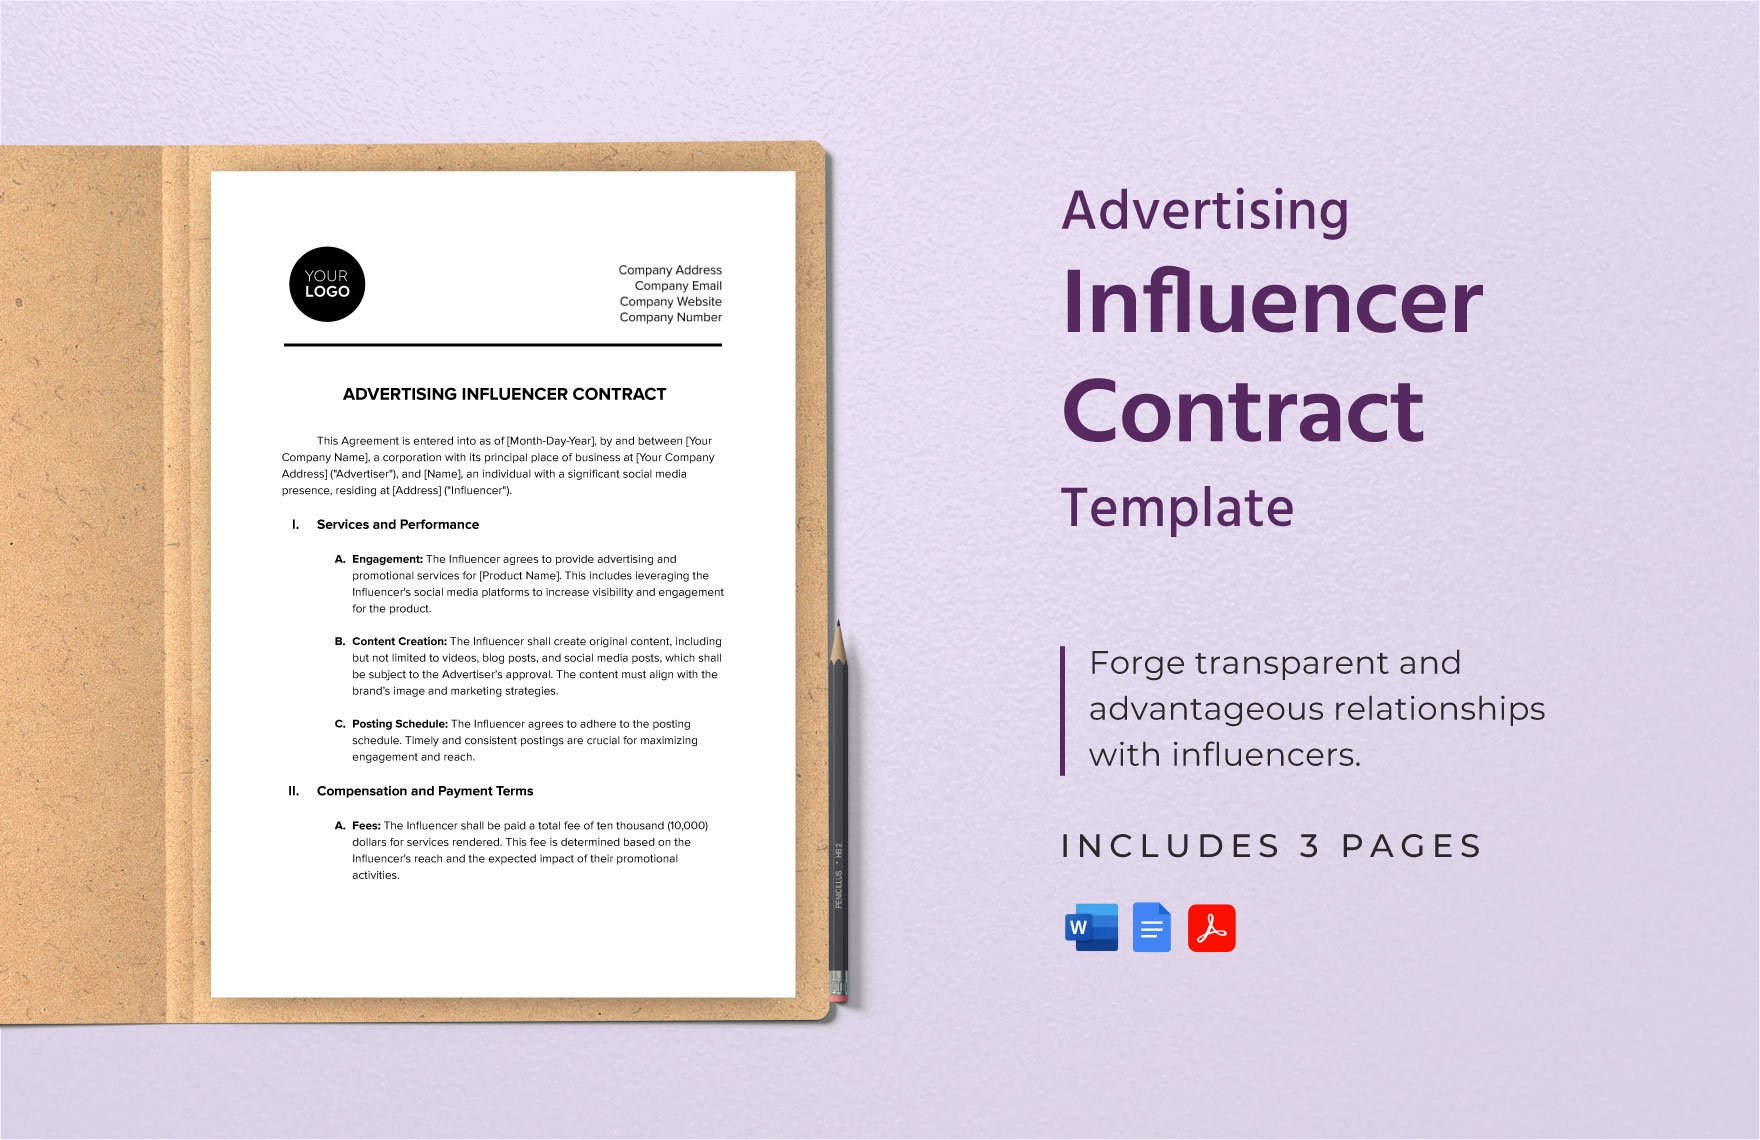 Advertising Influencer Contract Template